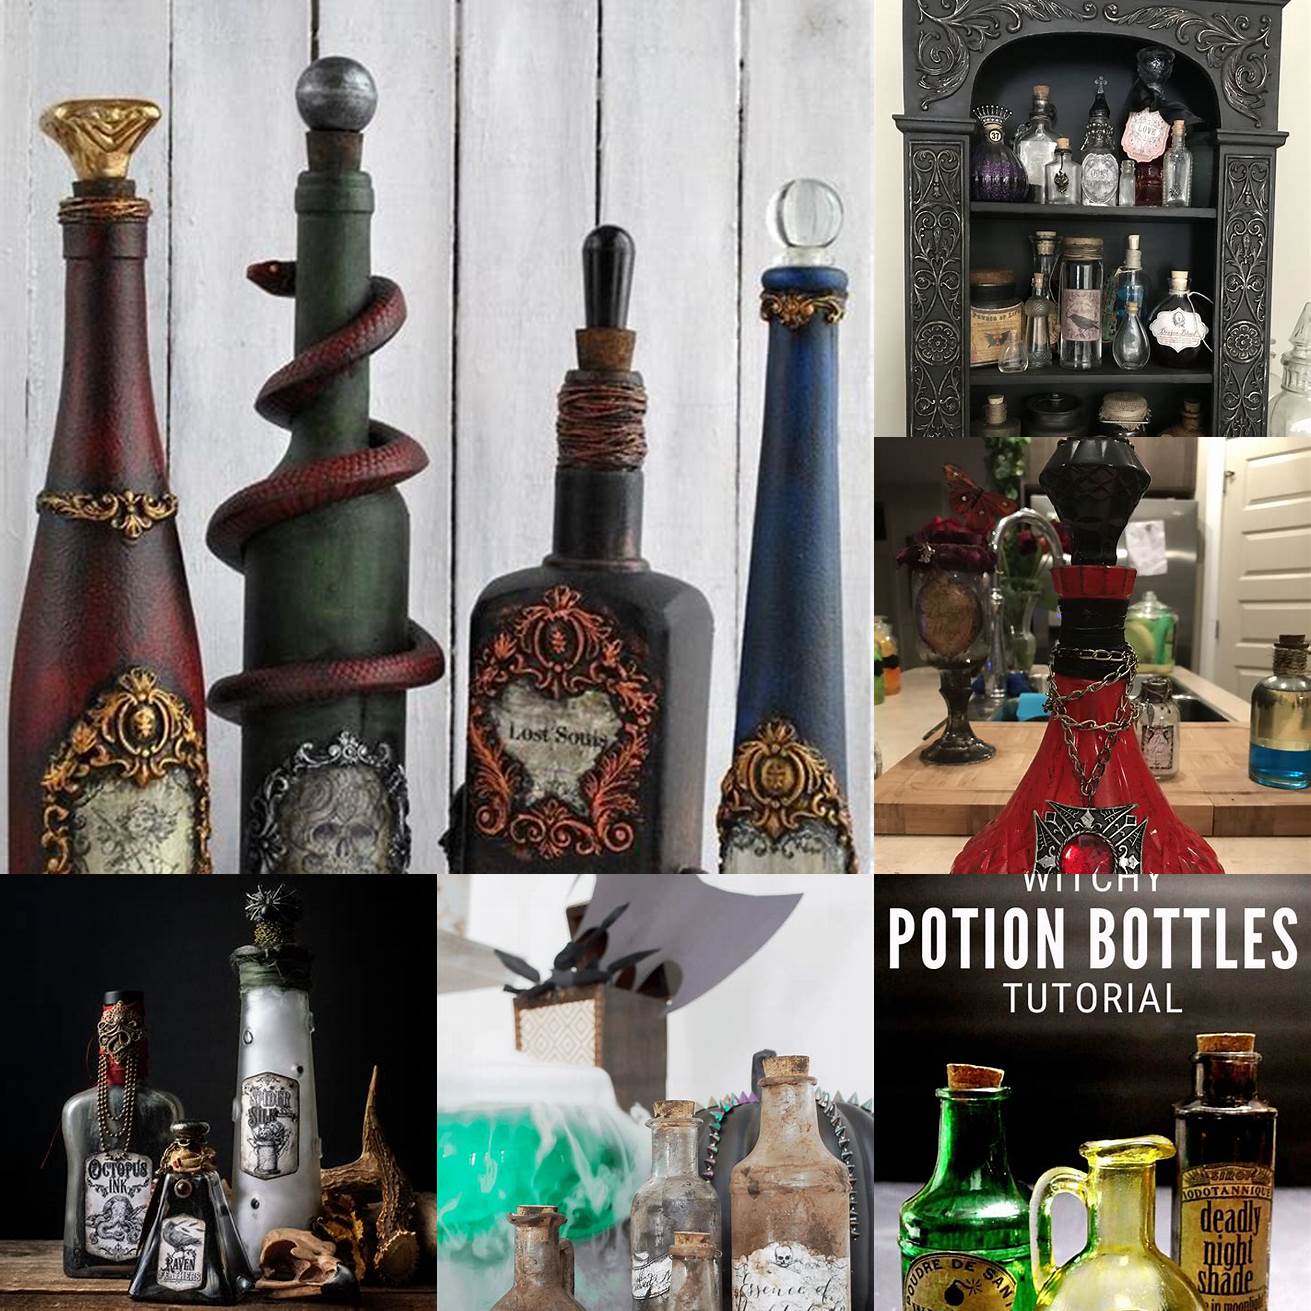 Witch potion bottles